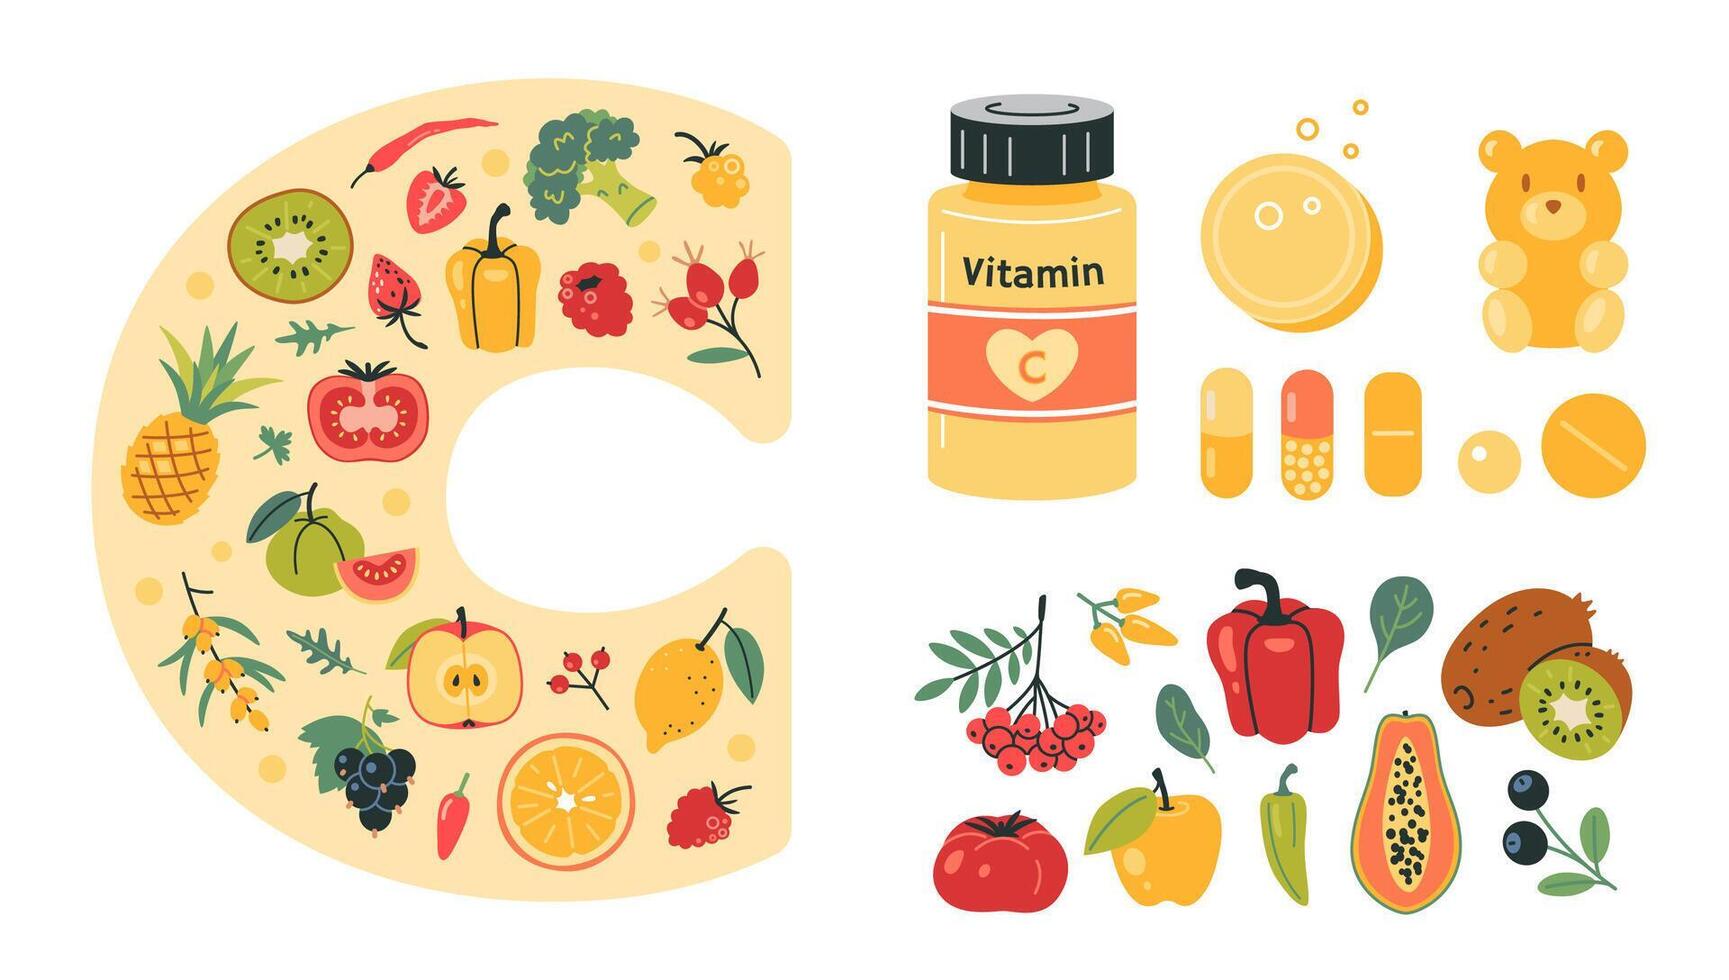 Vitamin C sources set with food rich in it, tablets and capsules. Fruits, berries, vegetables and pharmacy products. Natural antioxidant and immune support. Isolated cartoon illustration, flat vector